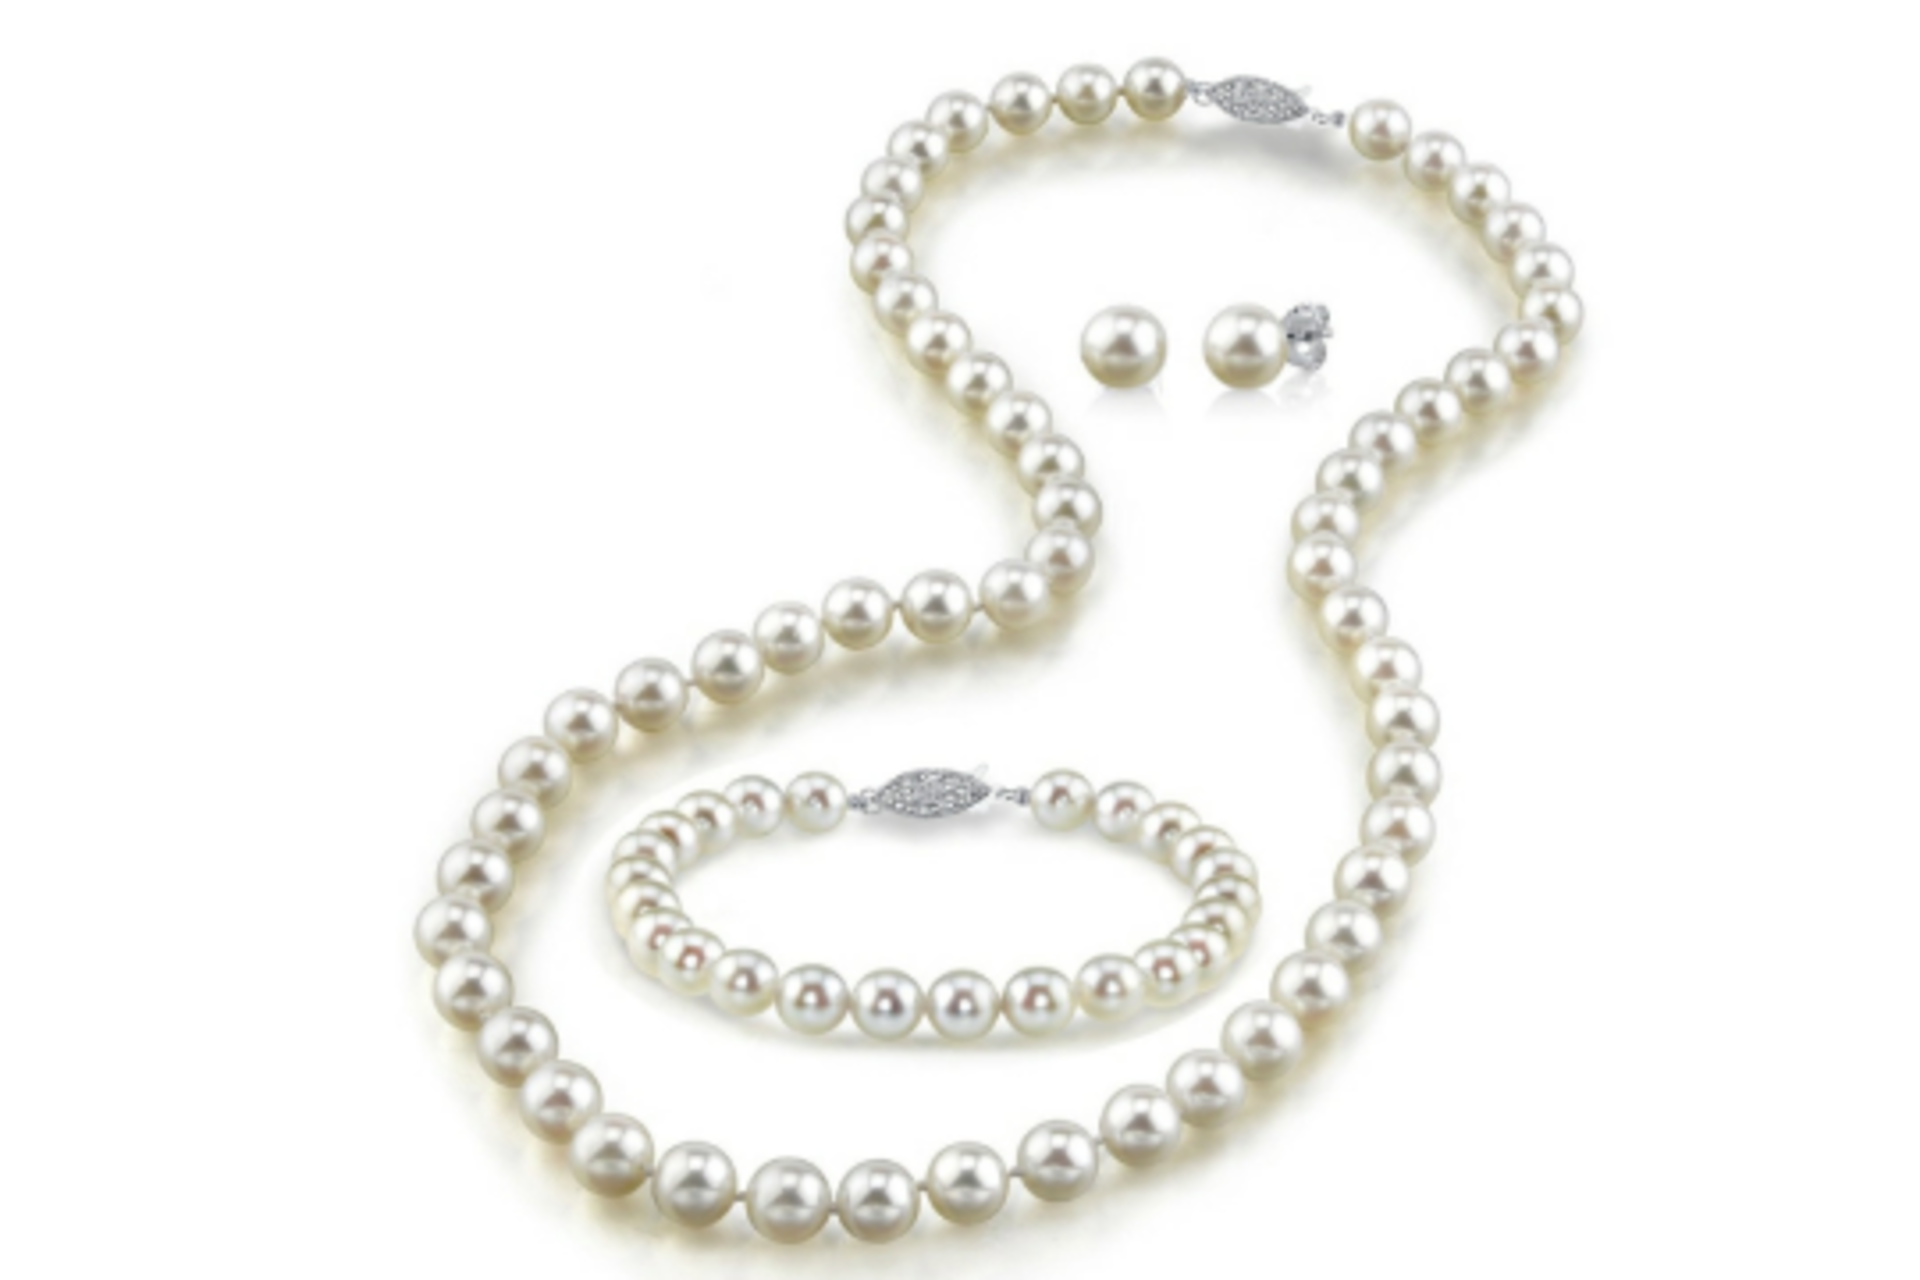 100 x NEW GIFT BOXED - GIANI JEWELLERY 3 PIECE 'PEARL' NECKLACE, BRACELET & EAR RING SET. RRP £55